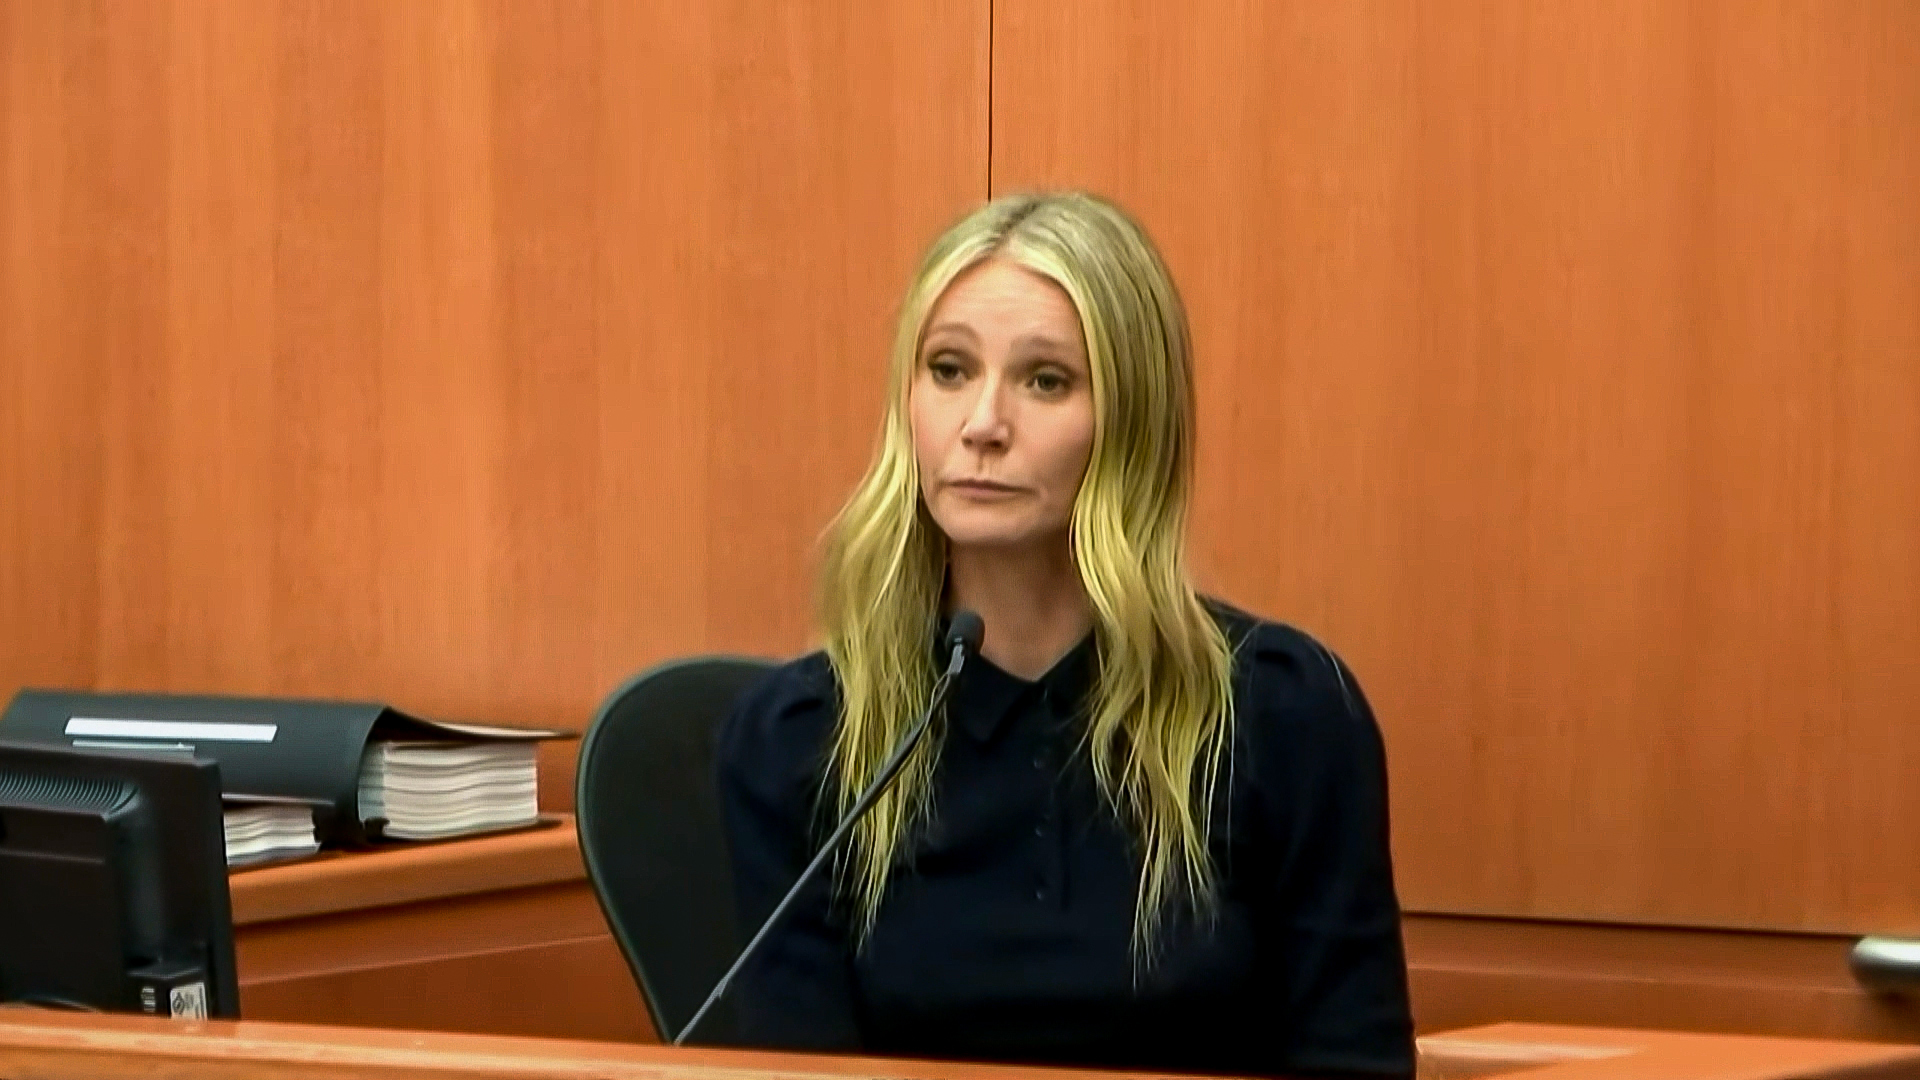 Here’s why Gwyneth Paltrow’s trial is becoming a meme